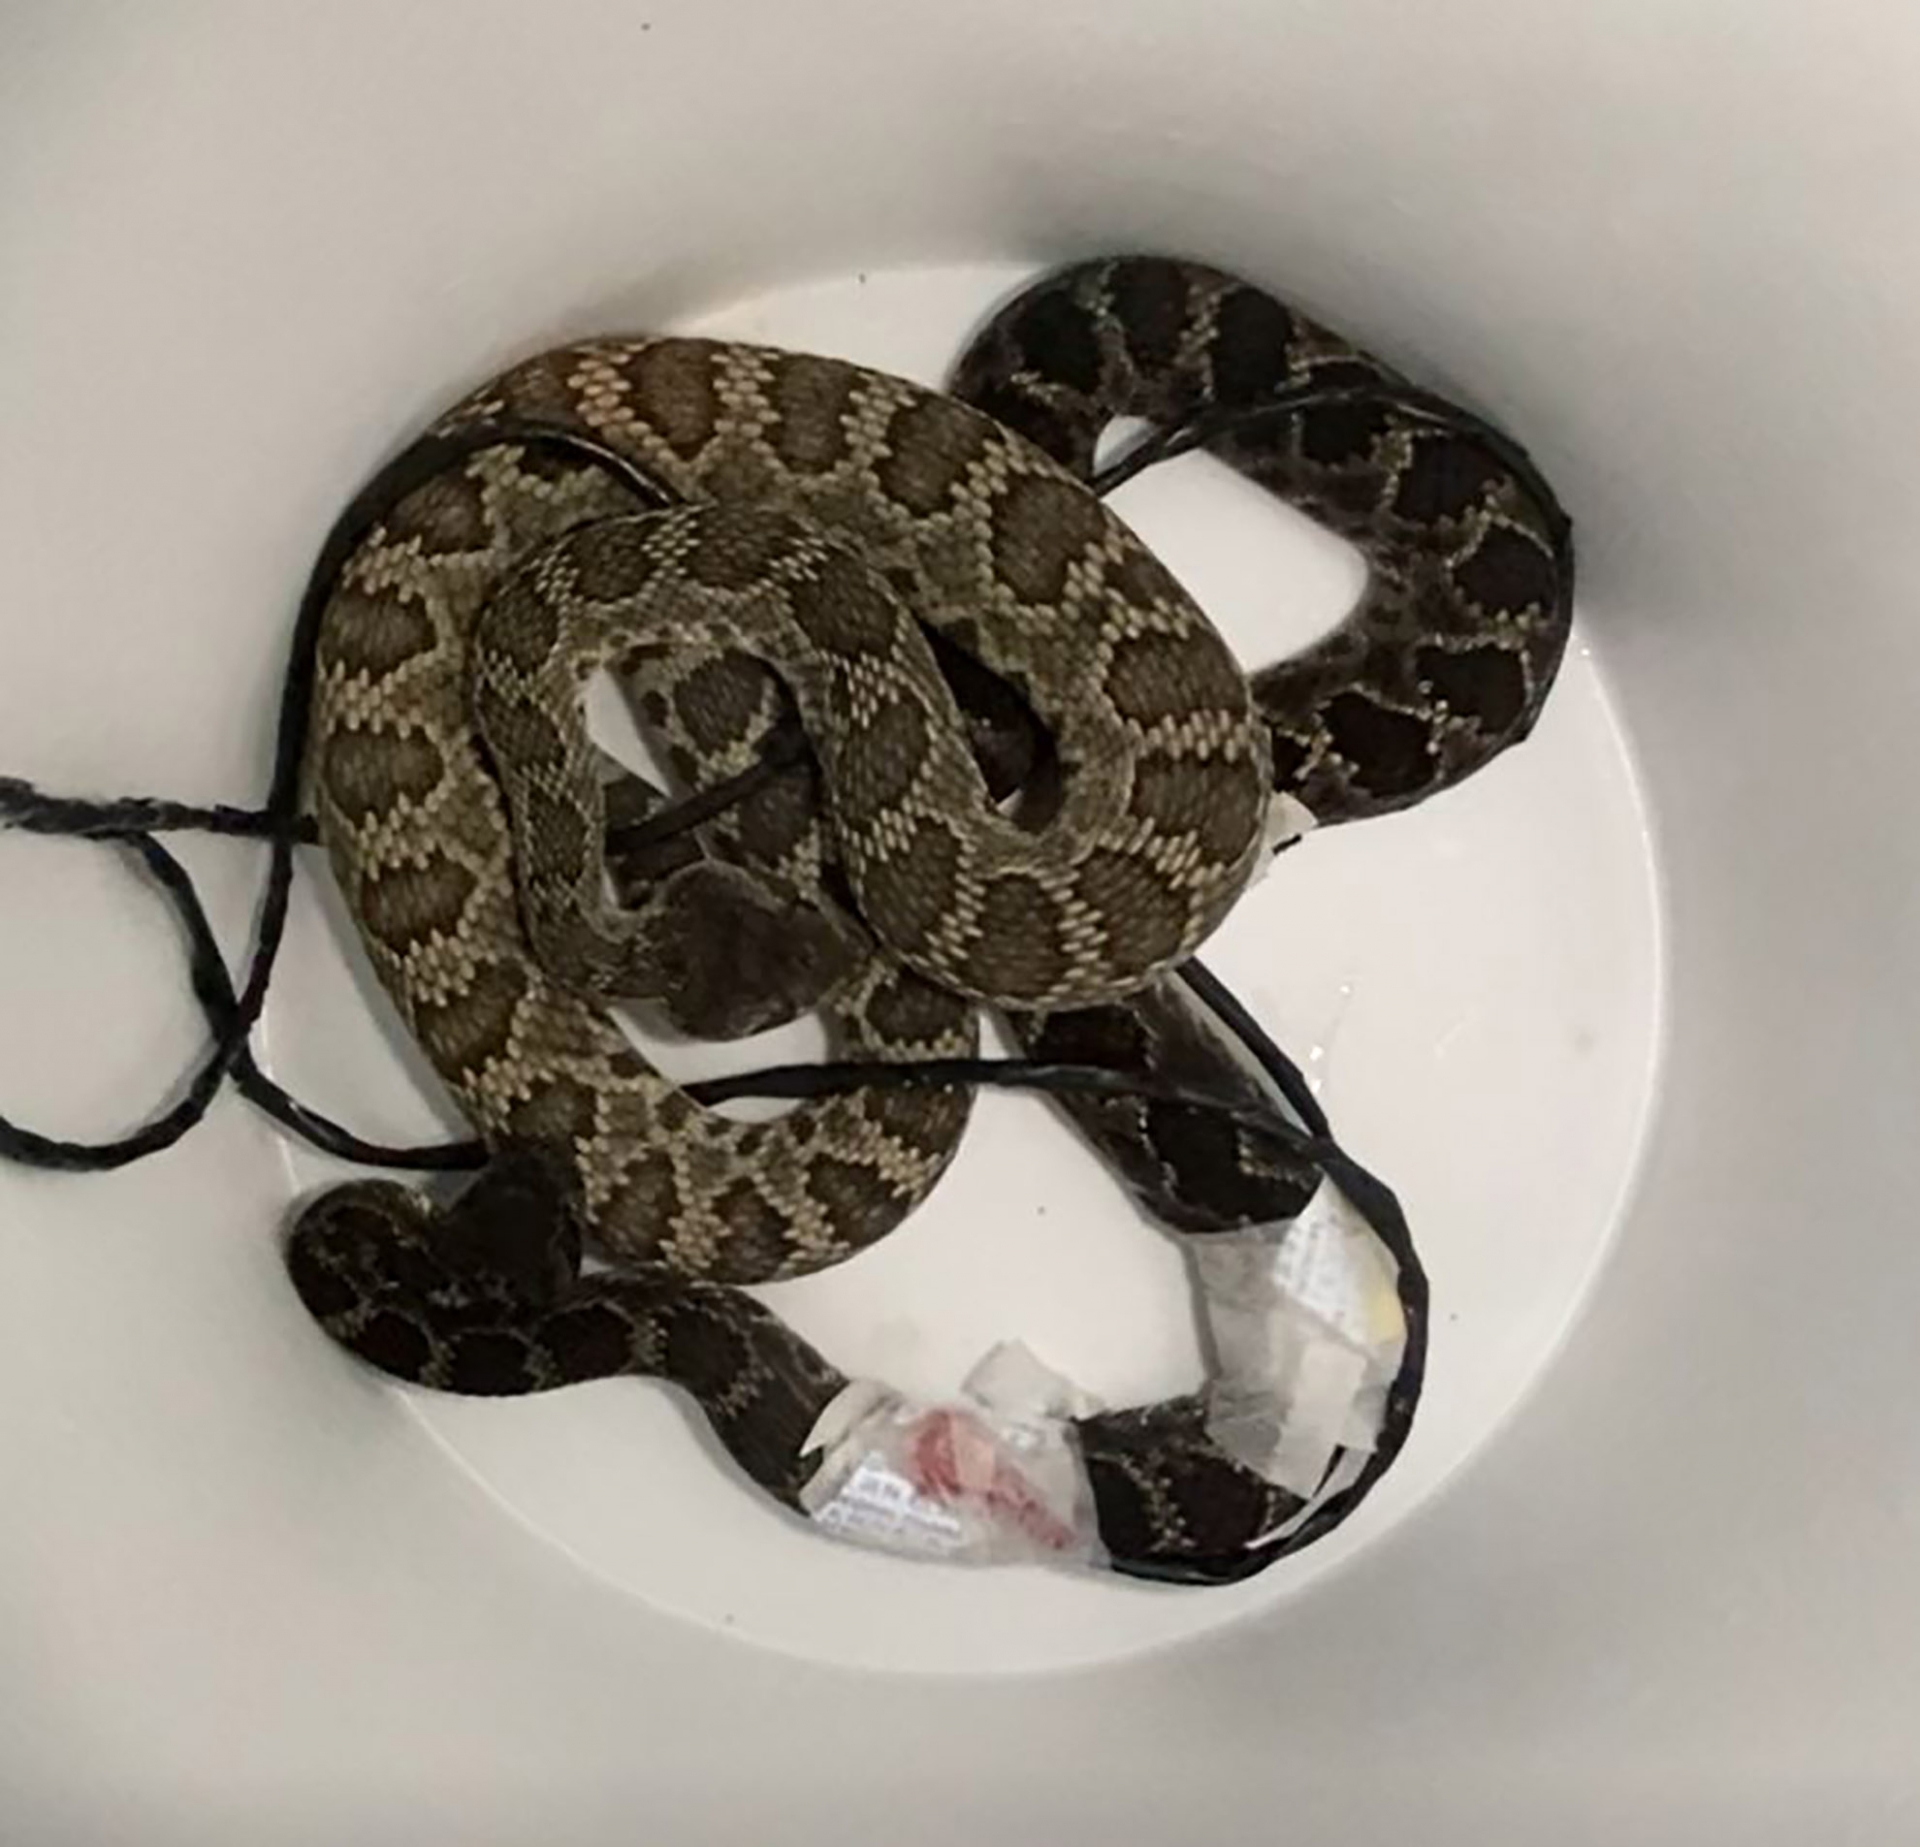 Southern Pacific rattlesnakes (Crotalus helleri) in a bucket during social buffering trials.